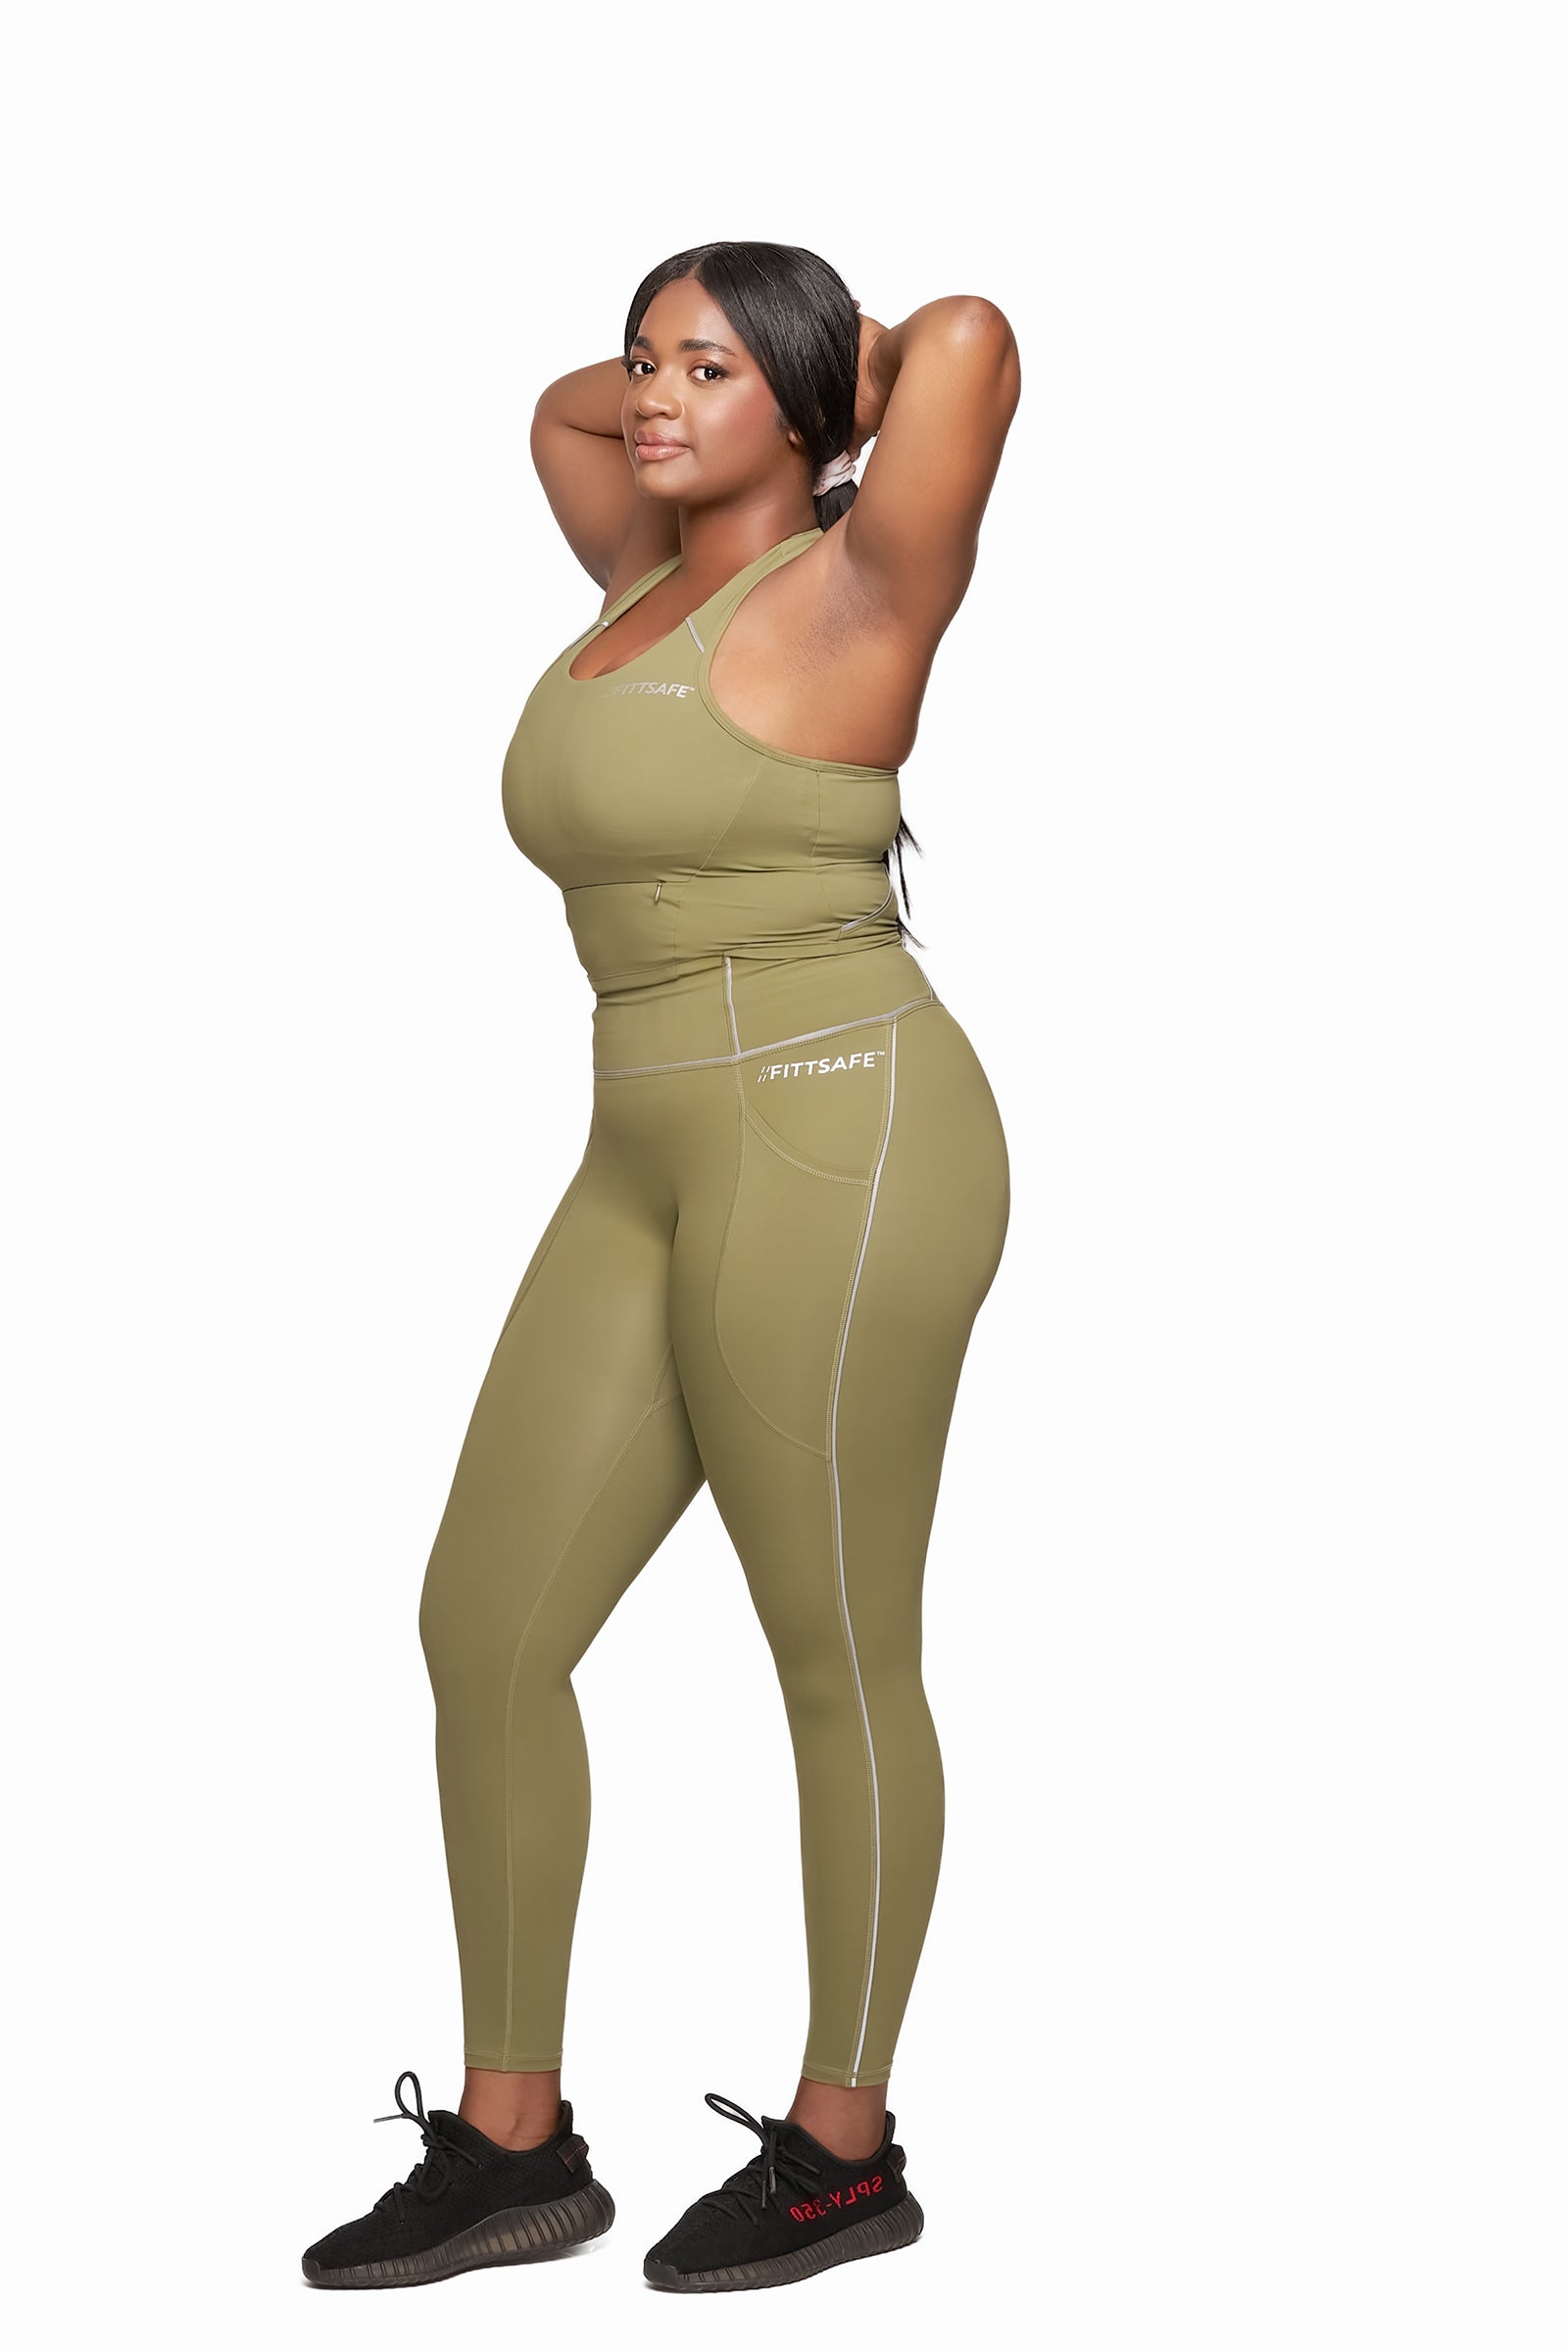 Woman wearing Green Fitt Safe Safety Leggings and Crop top